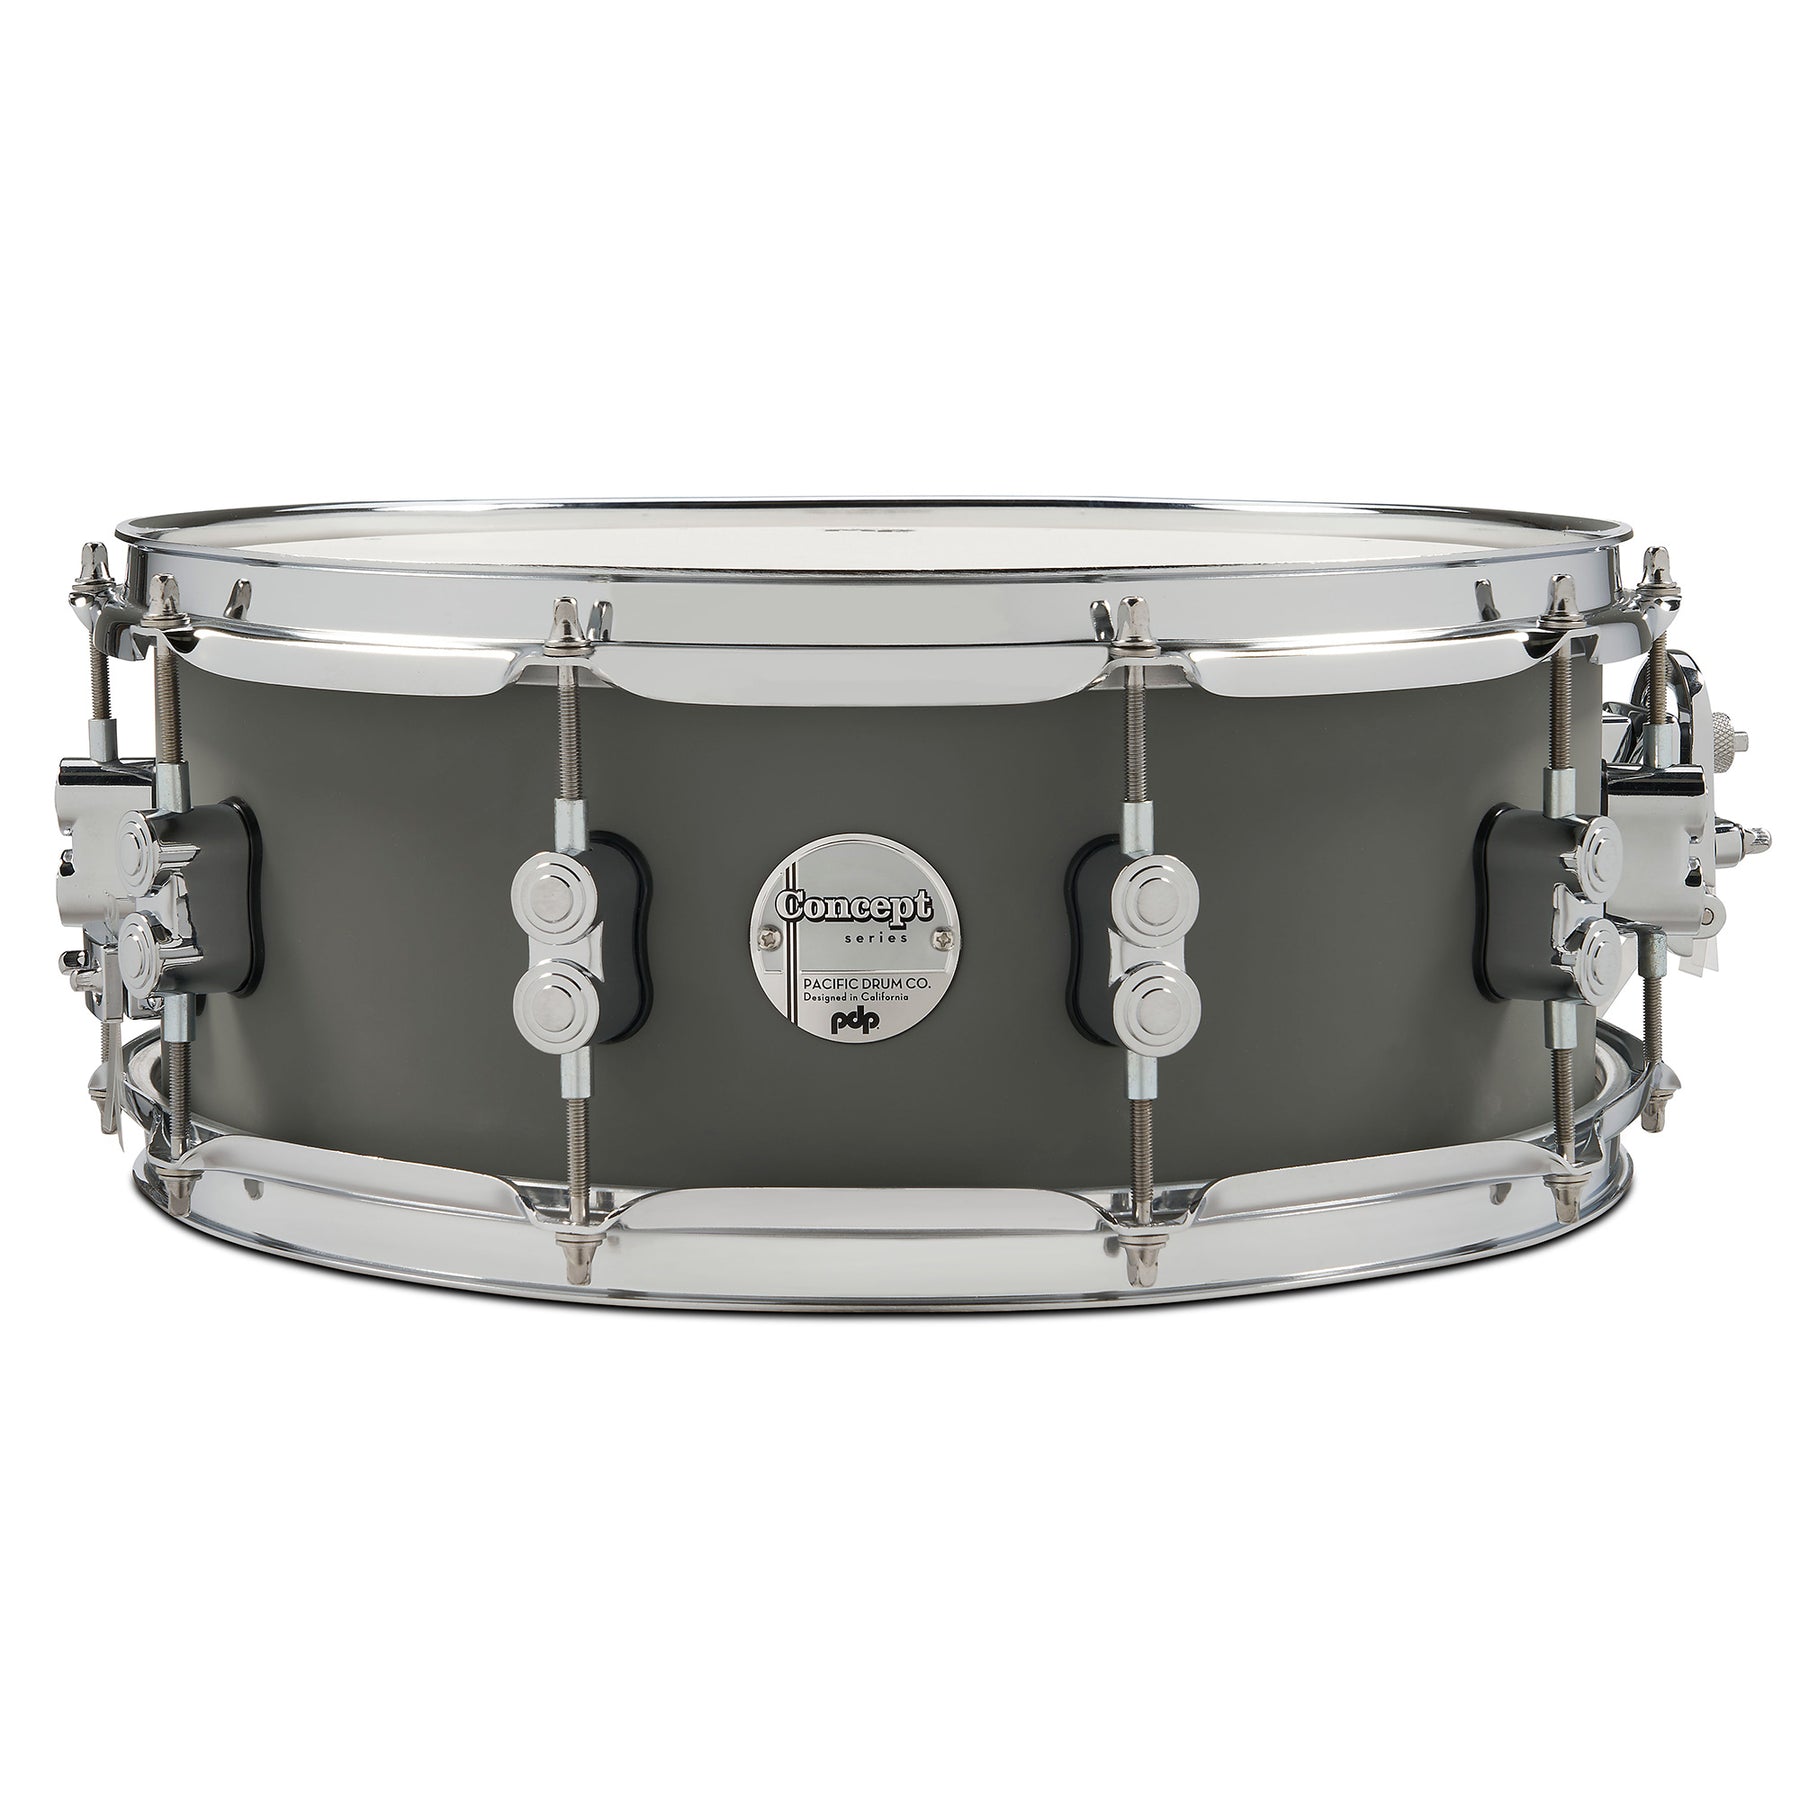 PDP Concept Maple Finish Ply 5.5x14 Snare Drum w/ Chrome